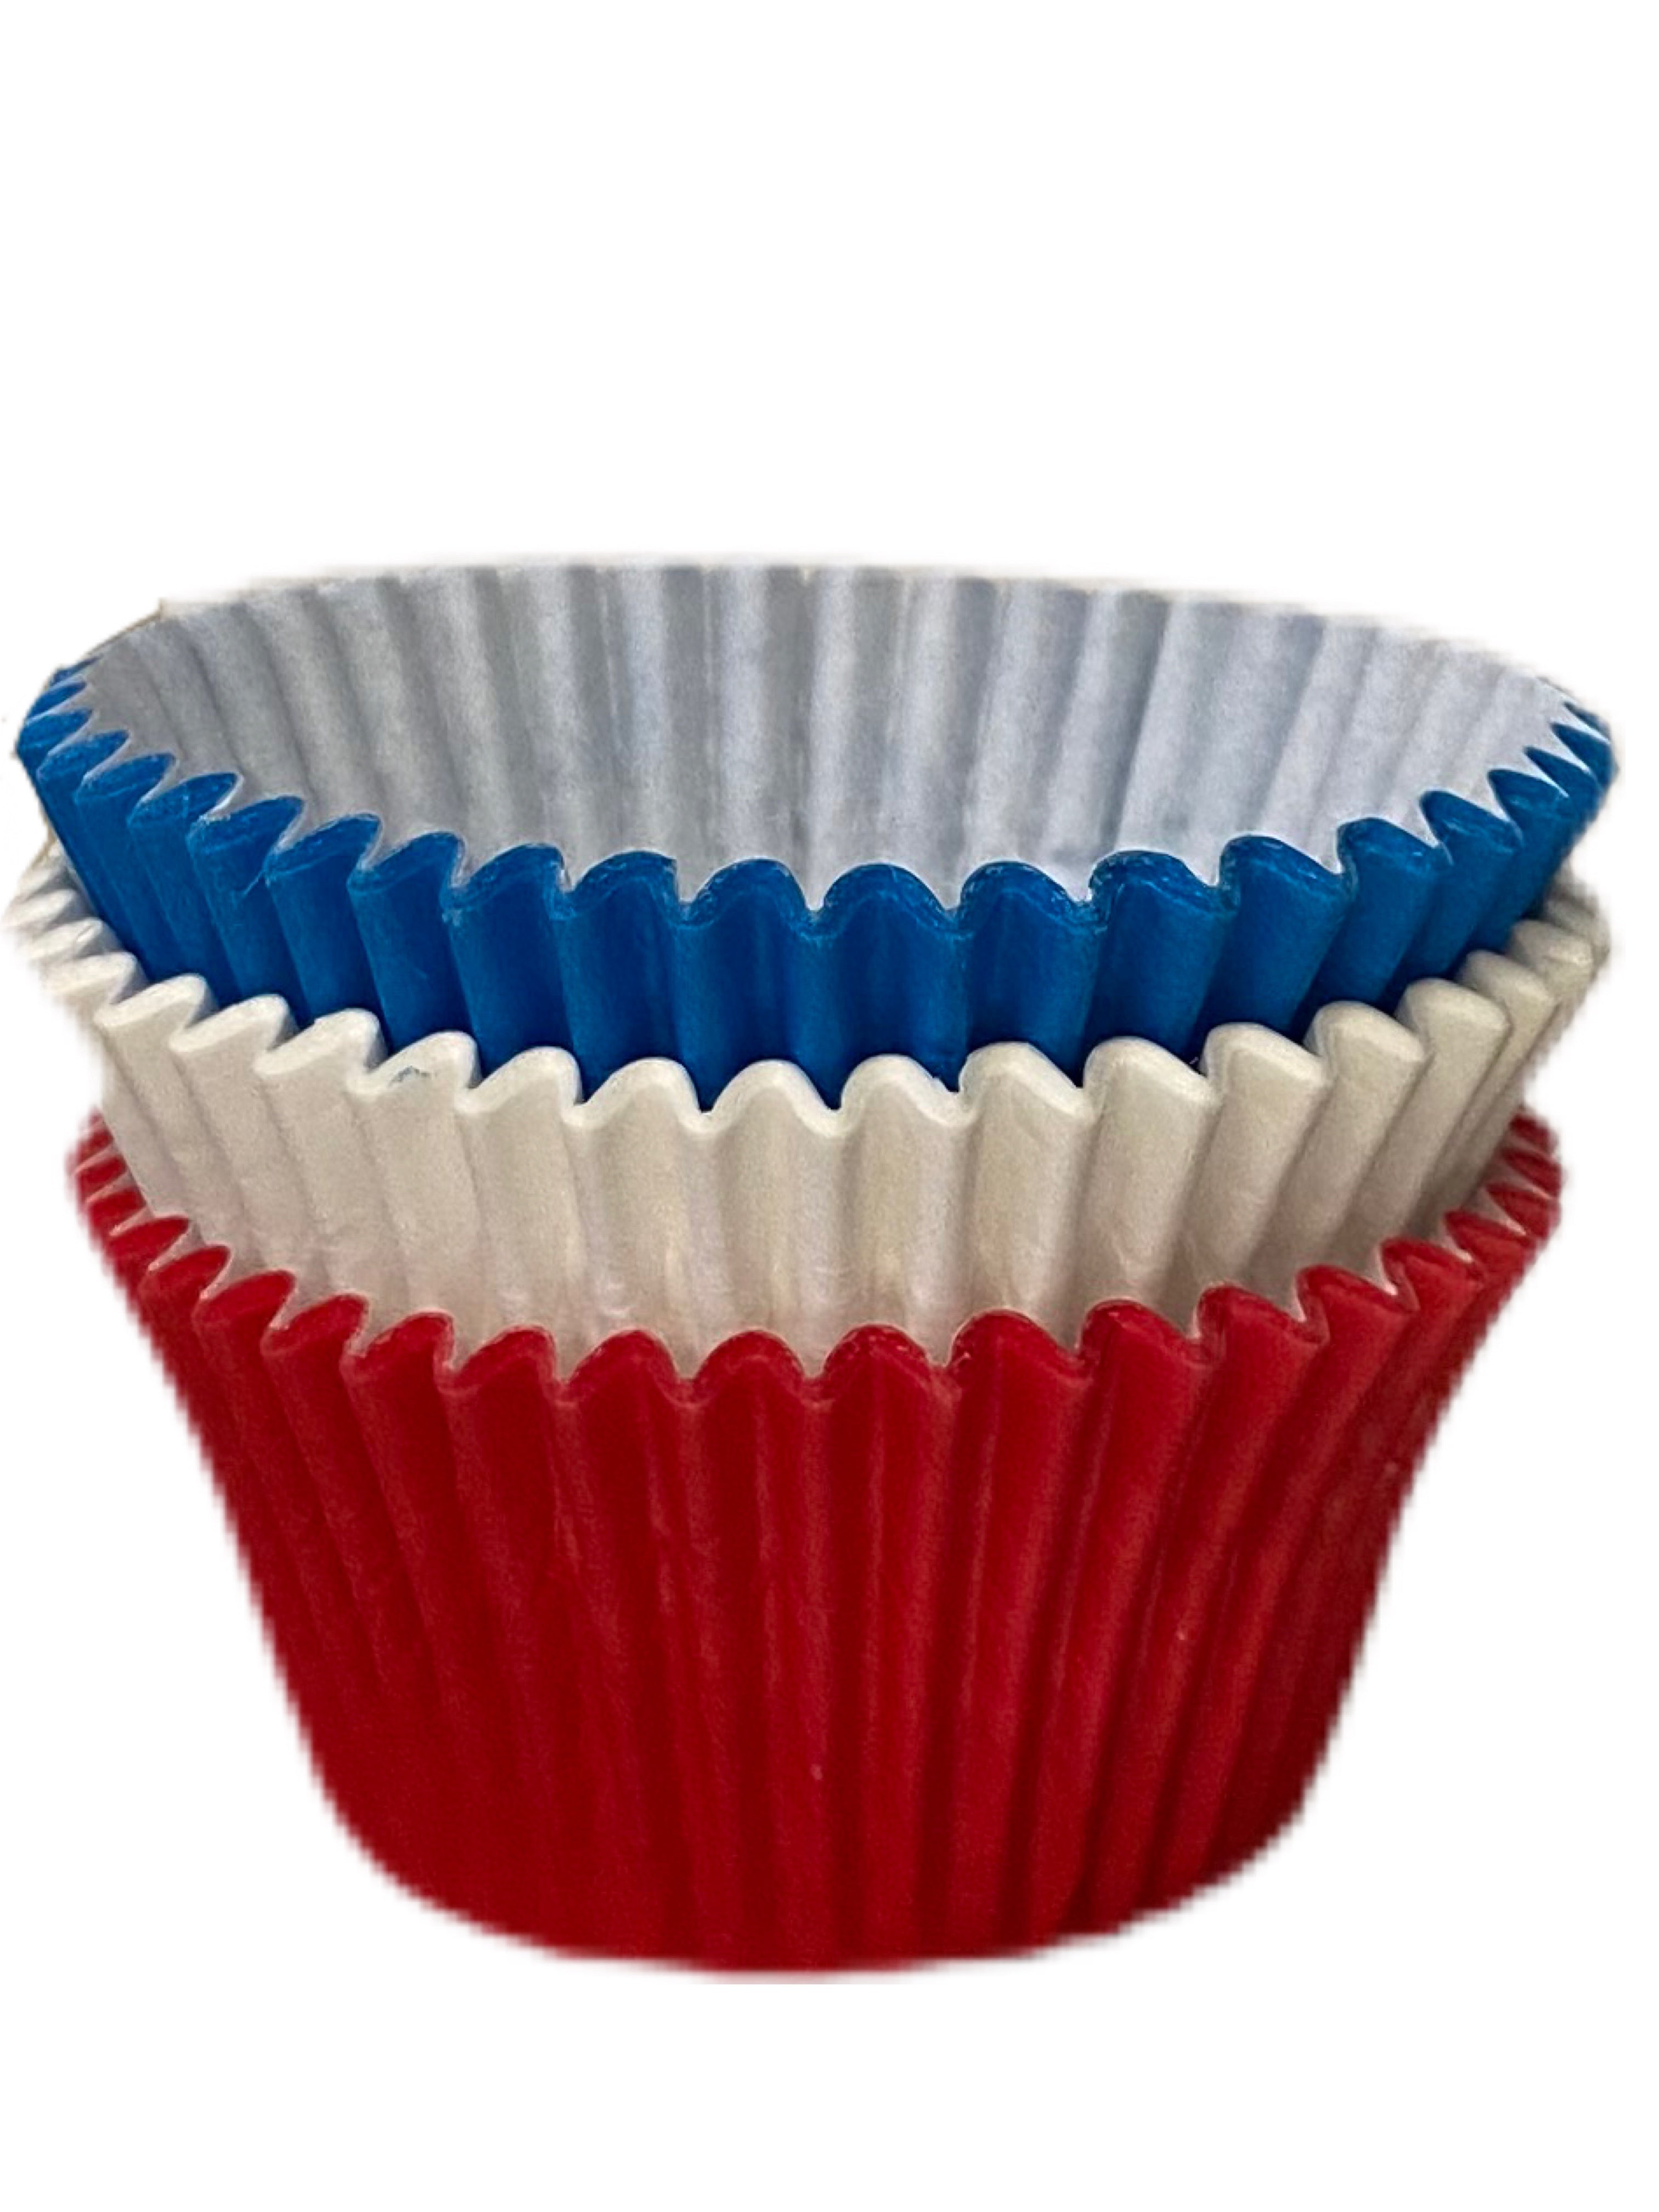 Paper Cupcake Baking Cases - pack of Approx 36 - Red, White & Blue (Jubilee Celebration Mix) - Kate's Cupboard